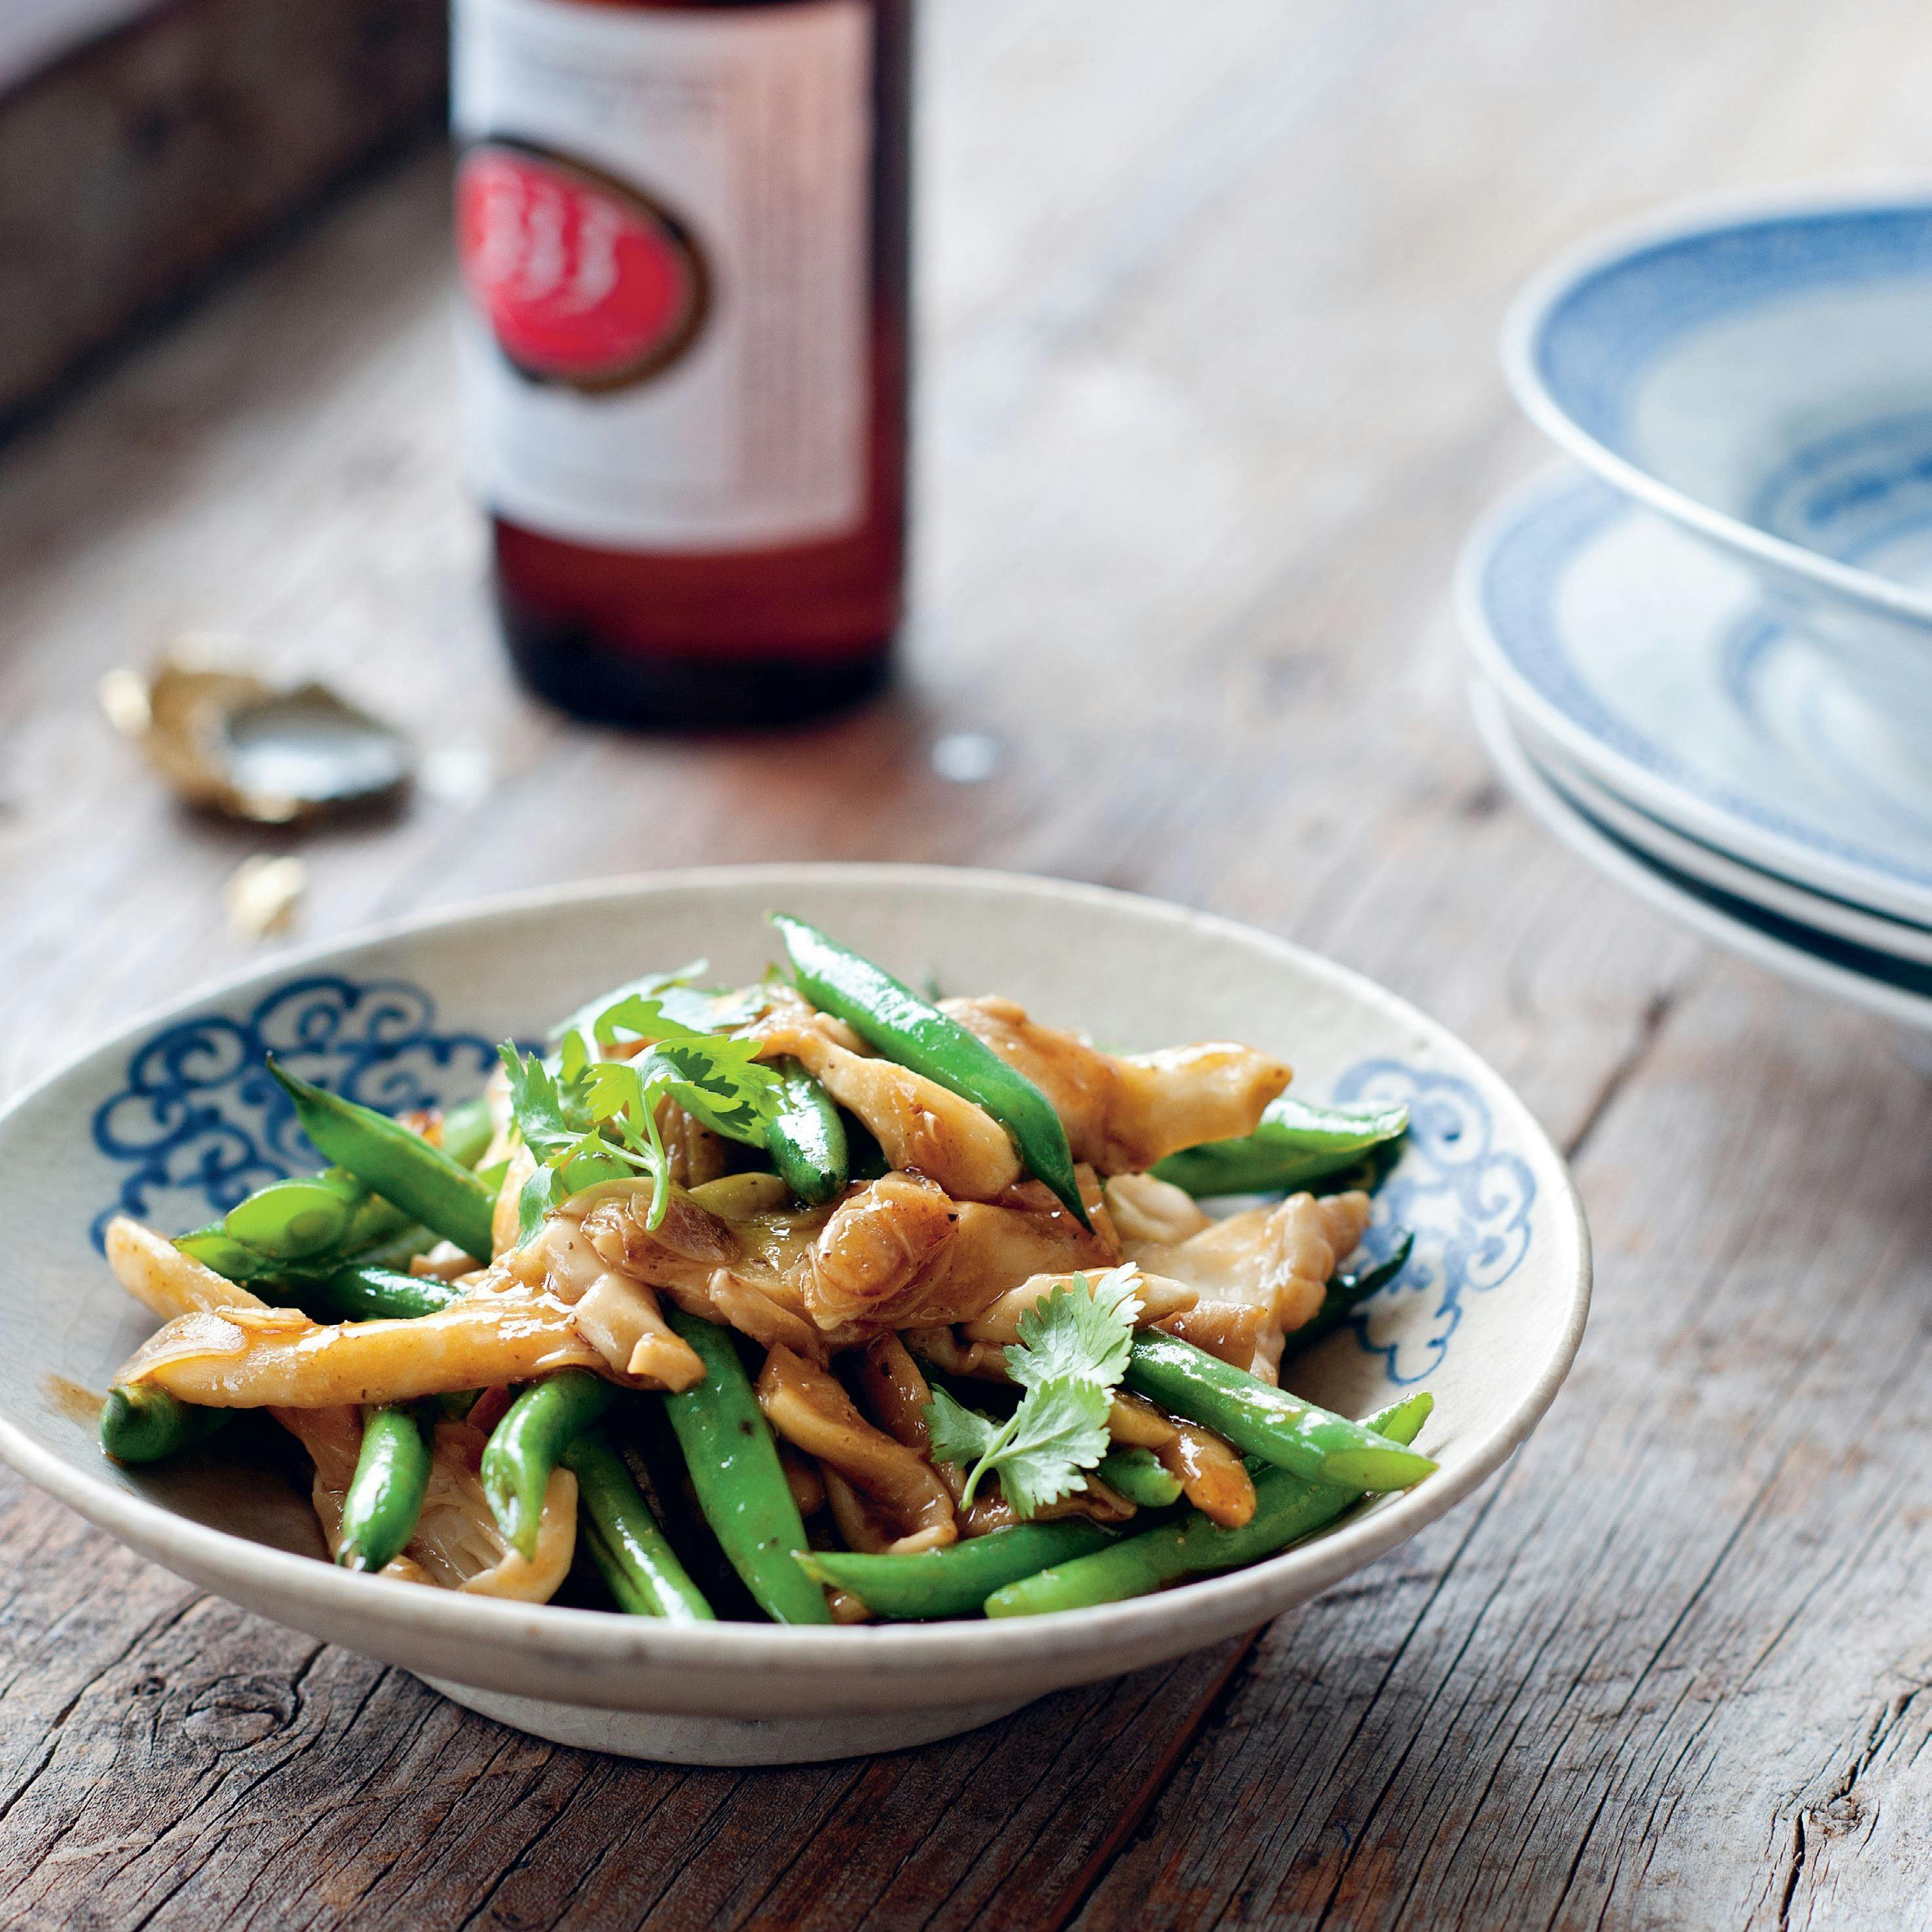 Green beans stir-fried with oyster mushrooms and garlic